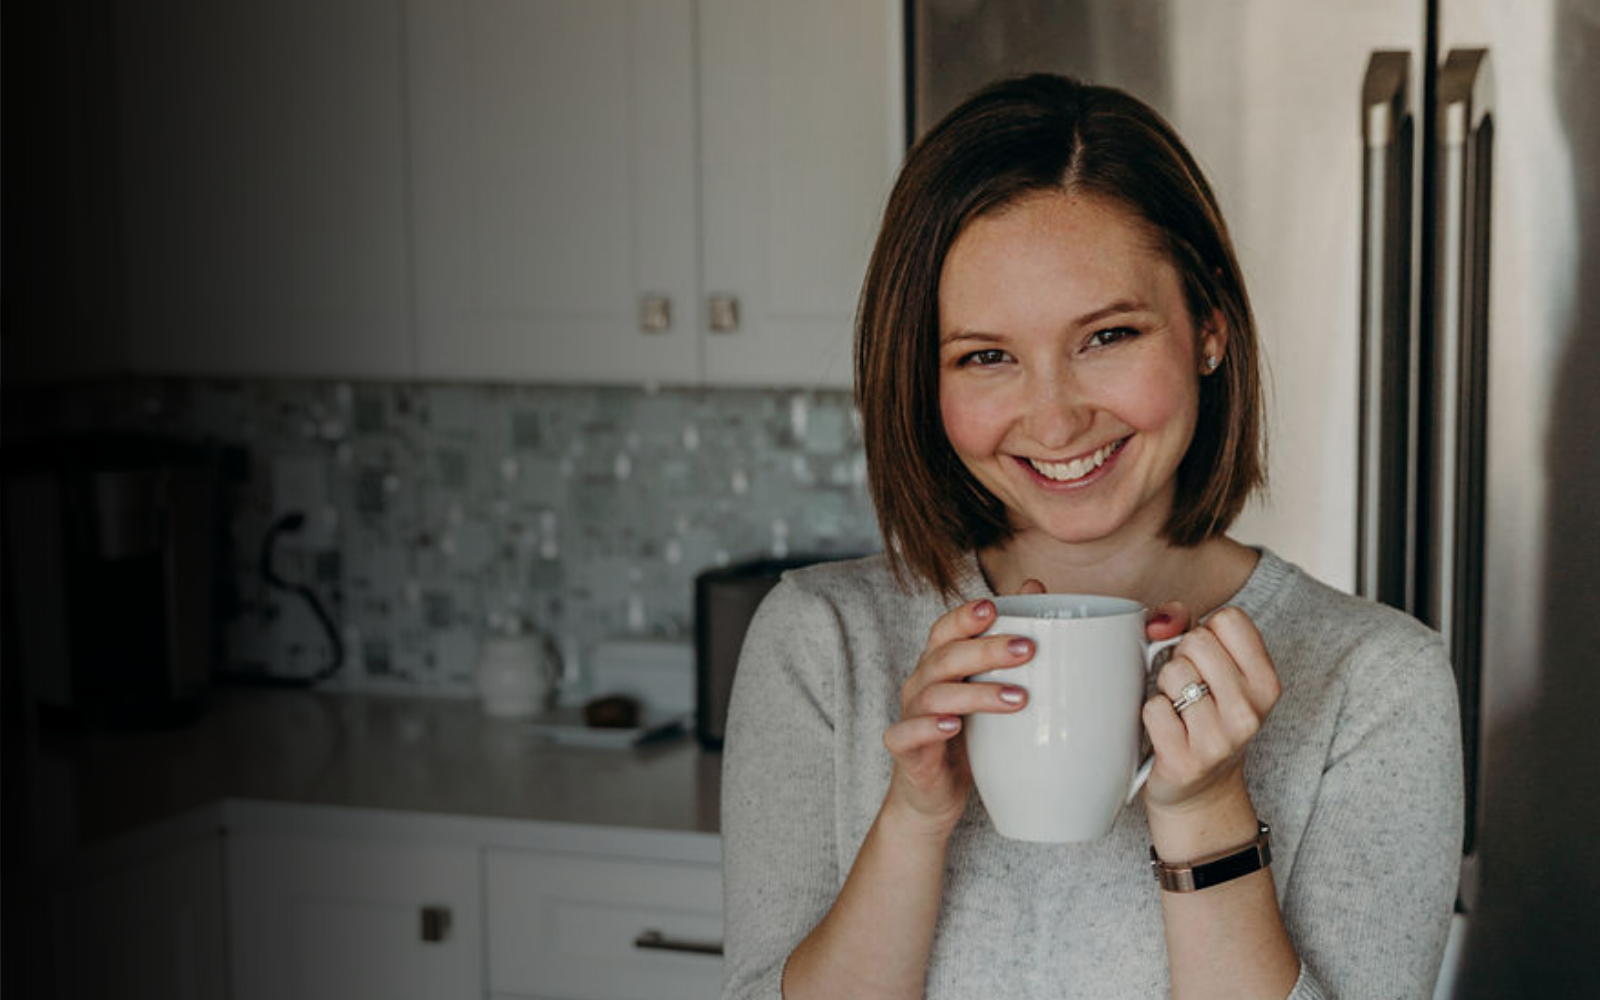 Registered Dietitian and Intuitive Eating Counsellor Jennifer Neale, RD. Jennifer is an Anti-Diet Dietitian who focuses on Intuitive Eating and teaches you how to listen to your body's innate hunger and fullness signals.